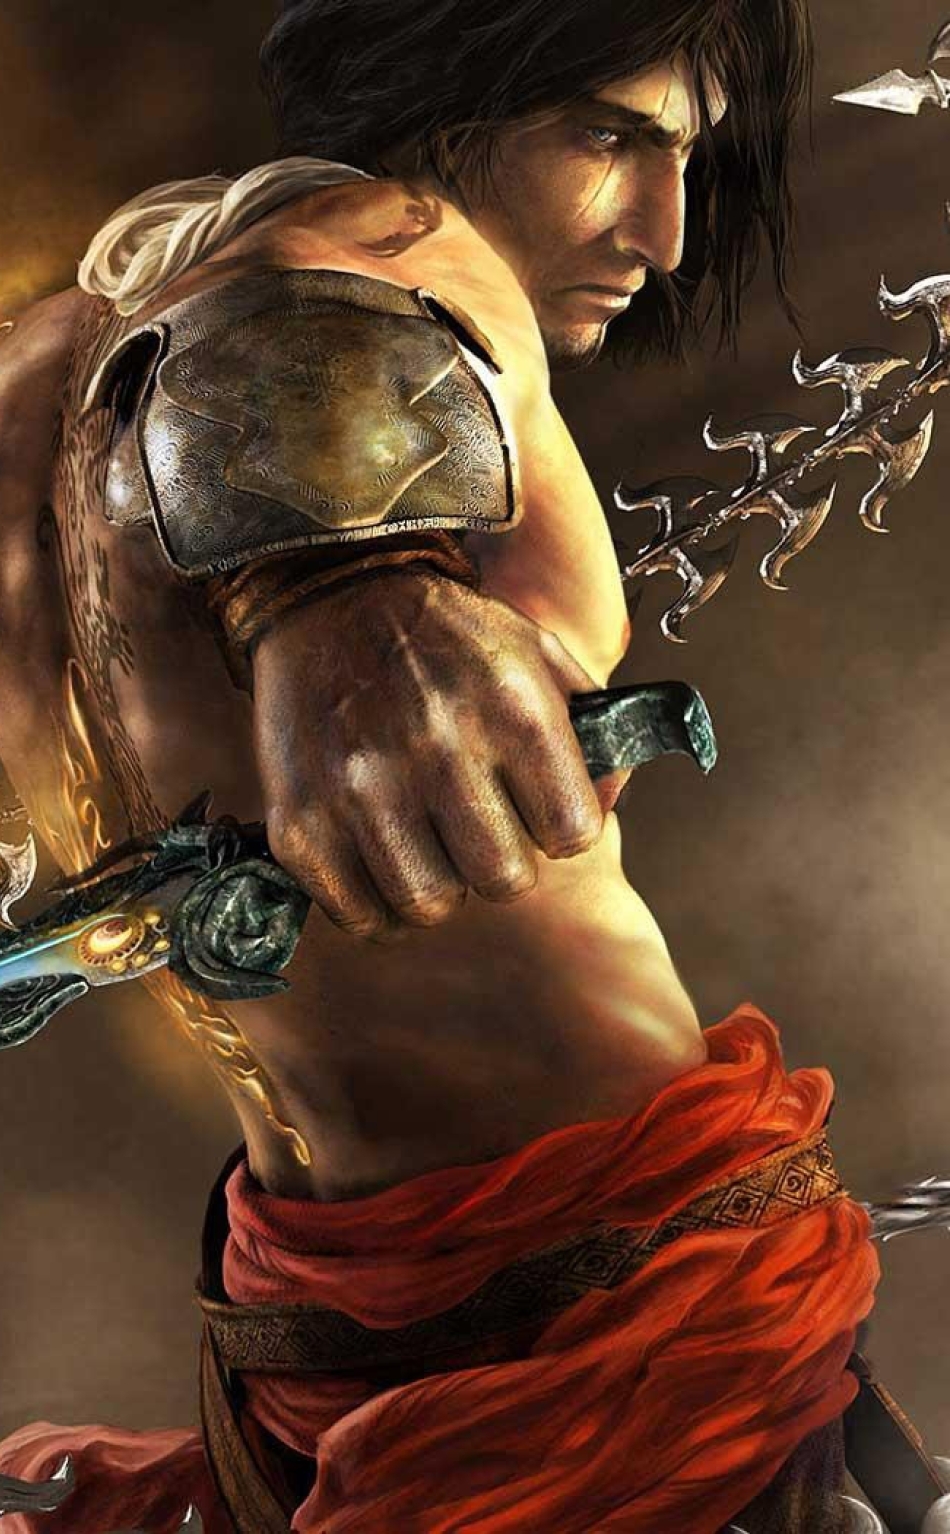 prince of persia 3d commands